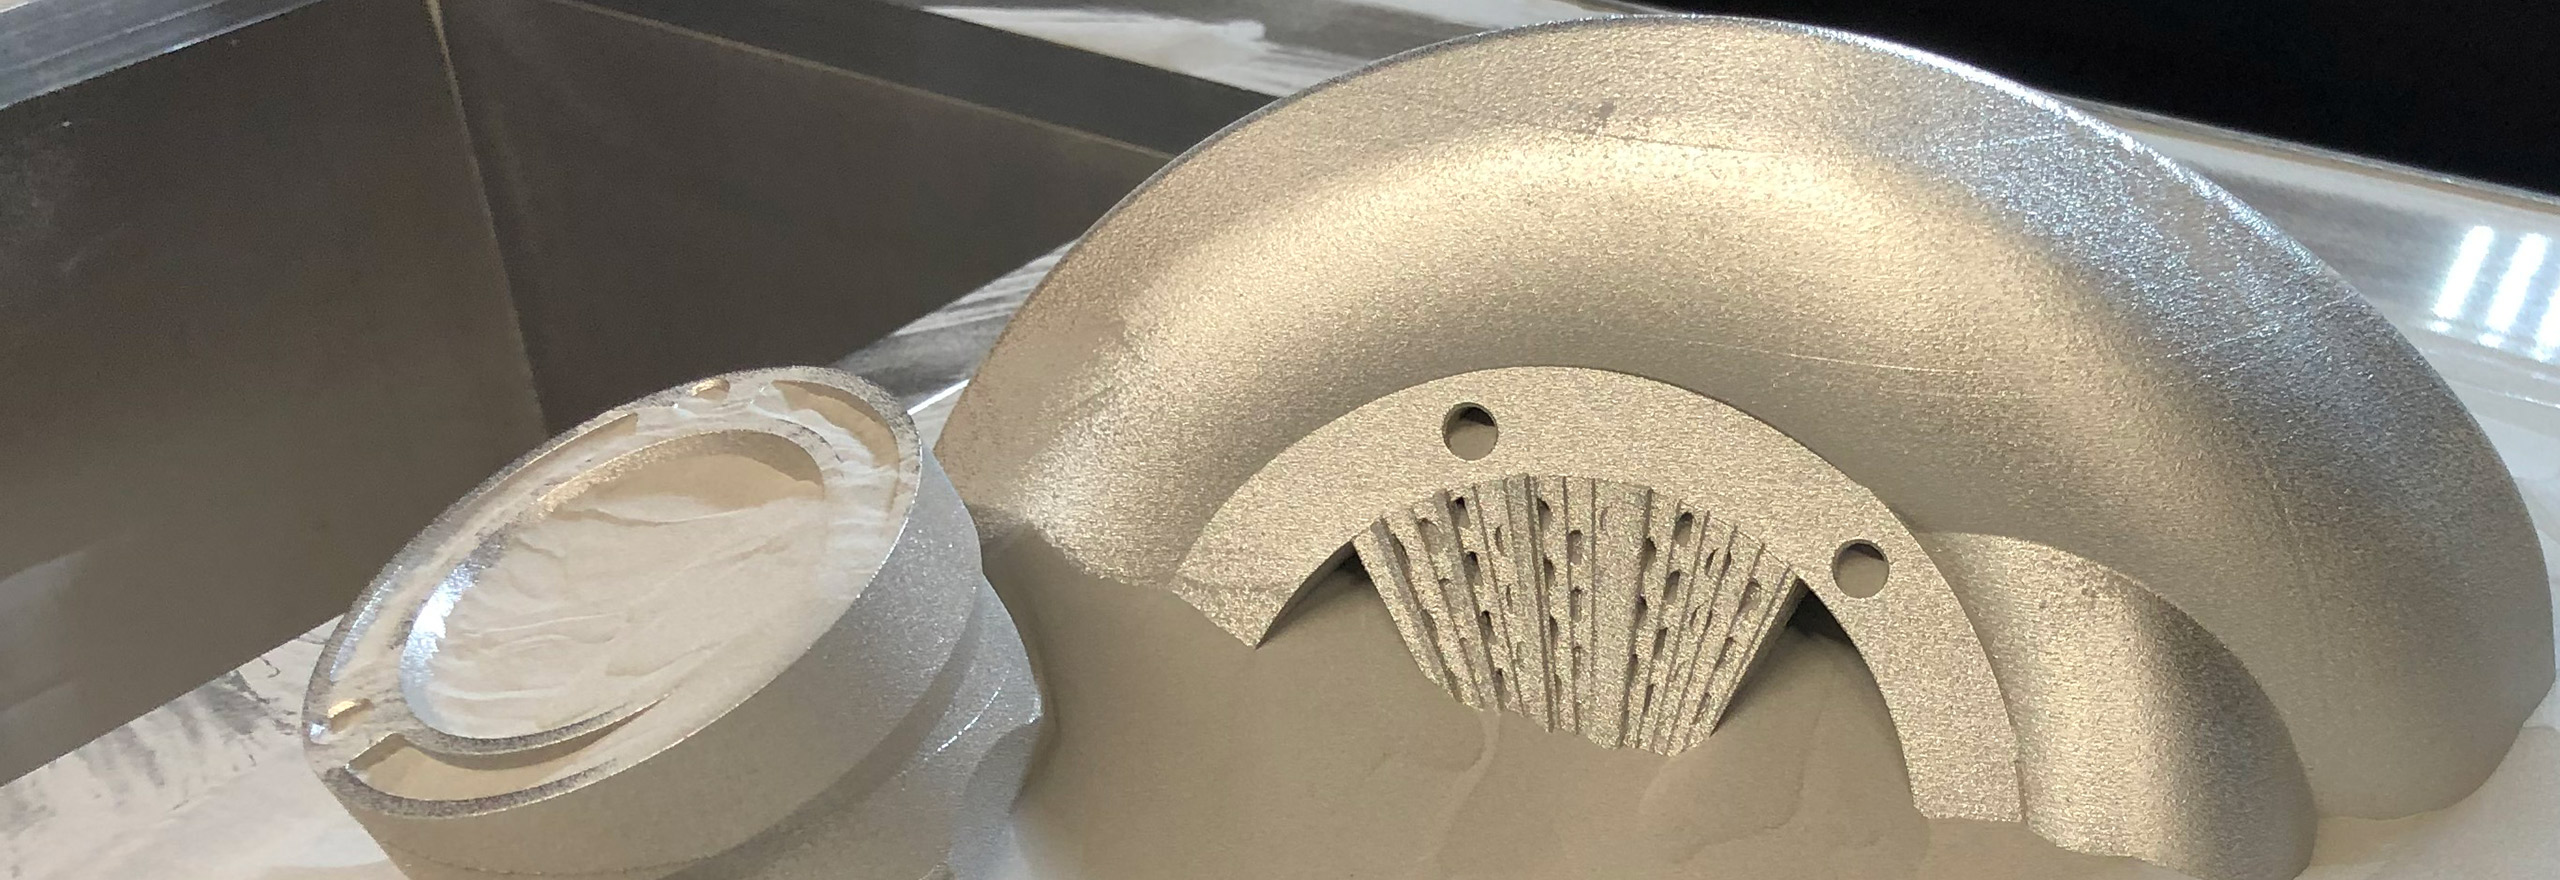 Laser scanning closes the digital gap in 3D printing and high end milling workflow